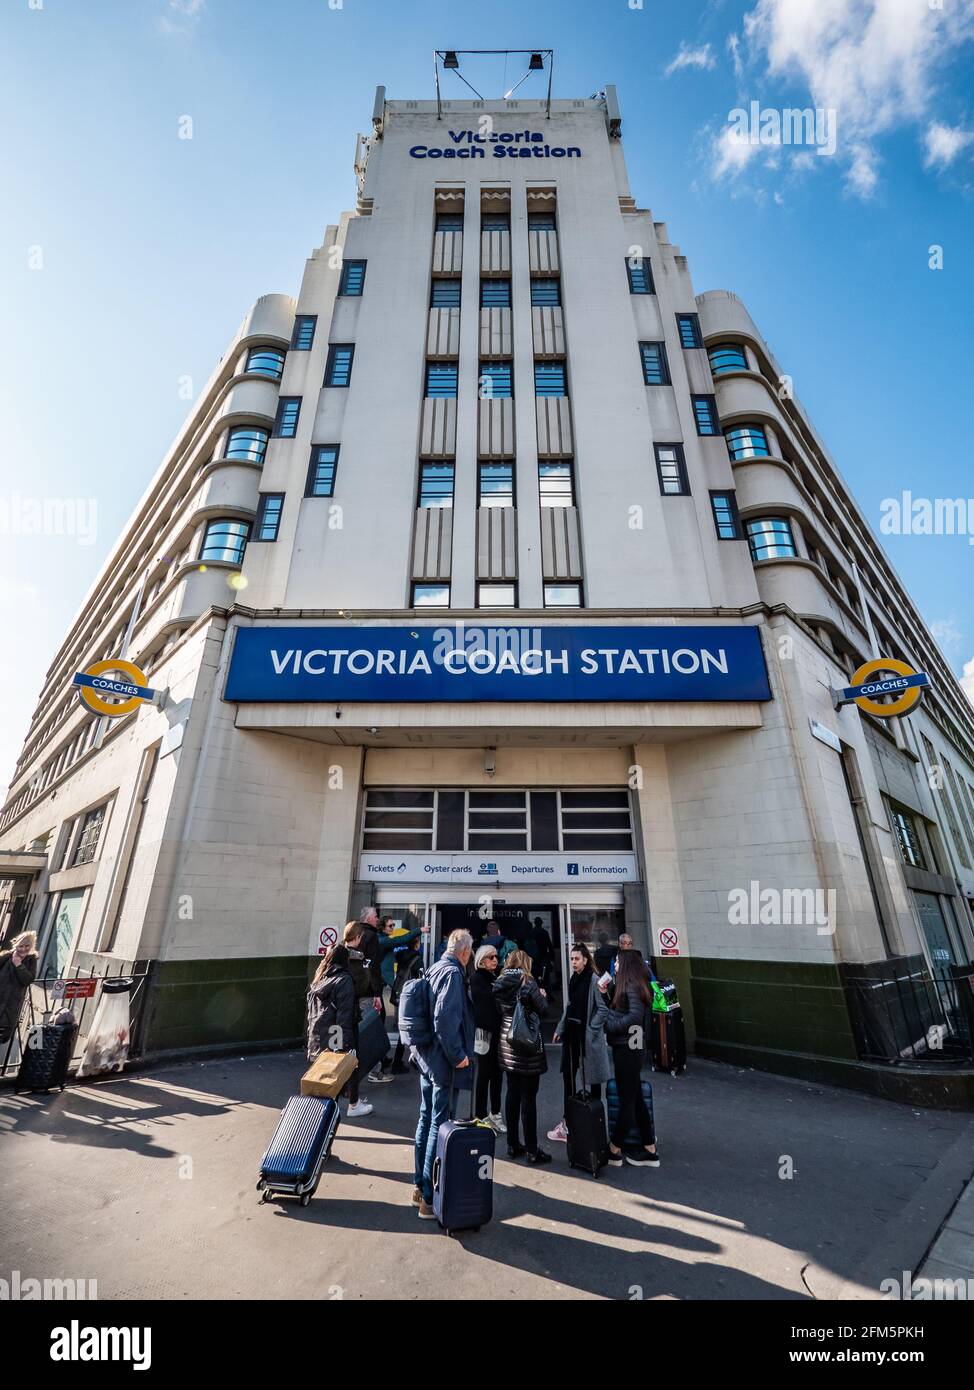 London Victoria Coach Station. Travellers arriving at the main entrance and 1930's Art Deco façade to London's largest bus terminal. Stock Photo